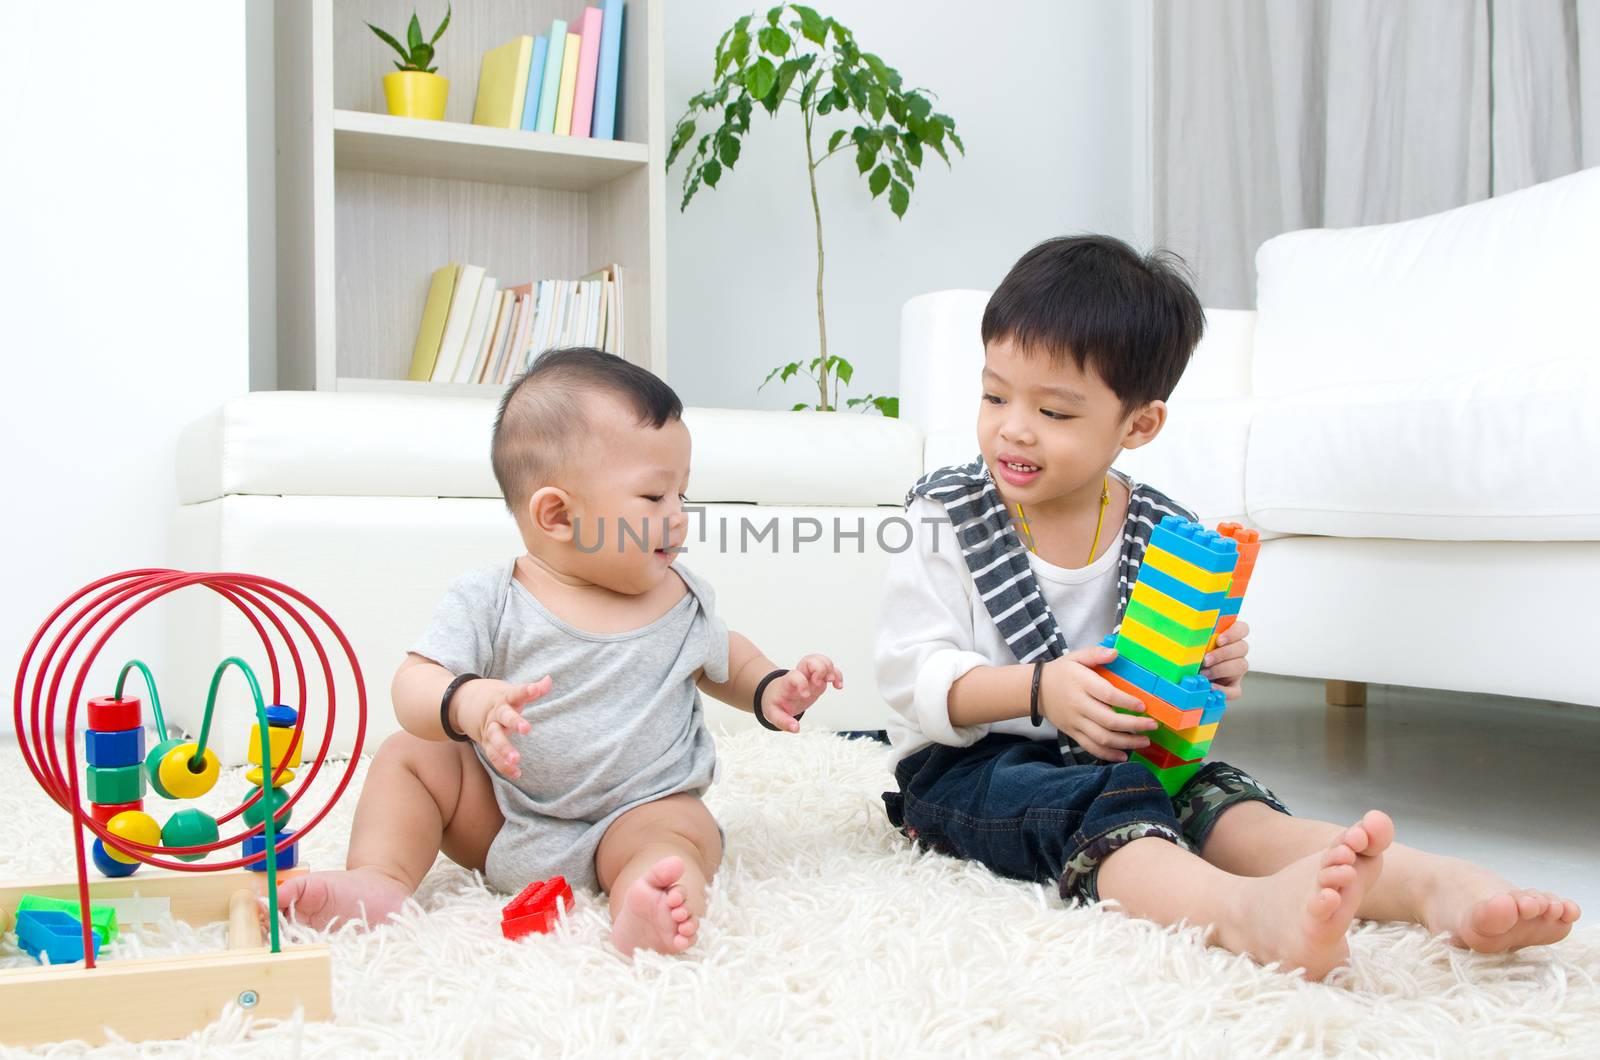 Asian kids sitting on the floor, playing with toy.